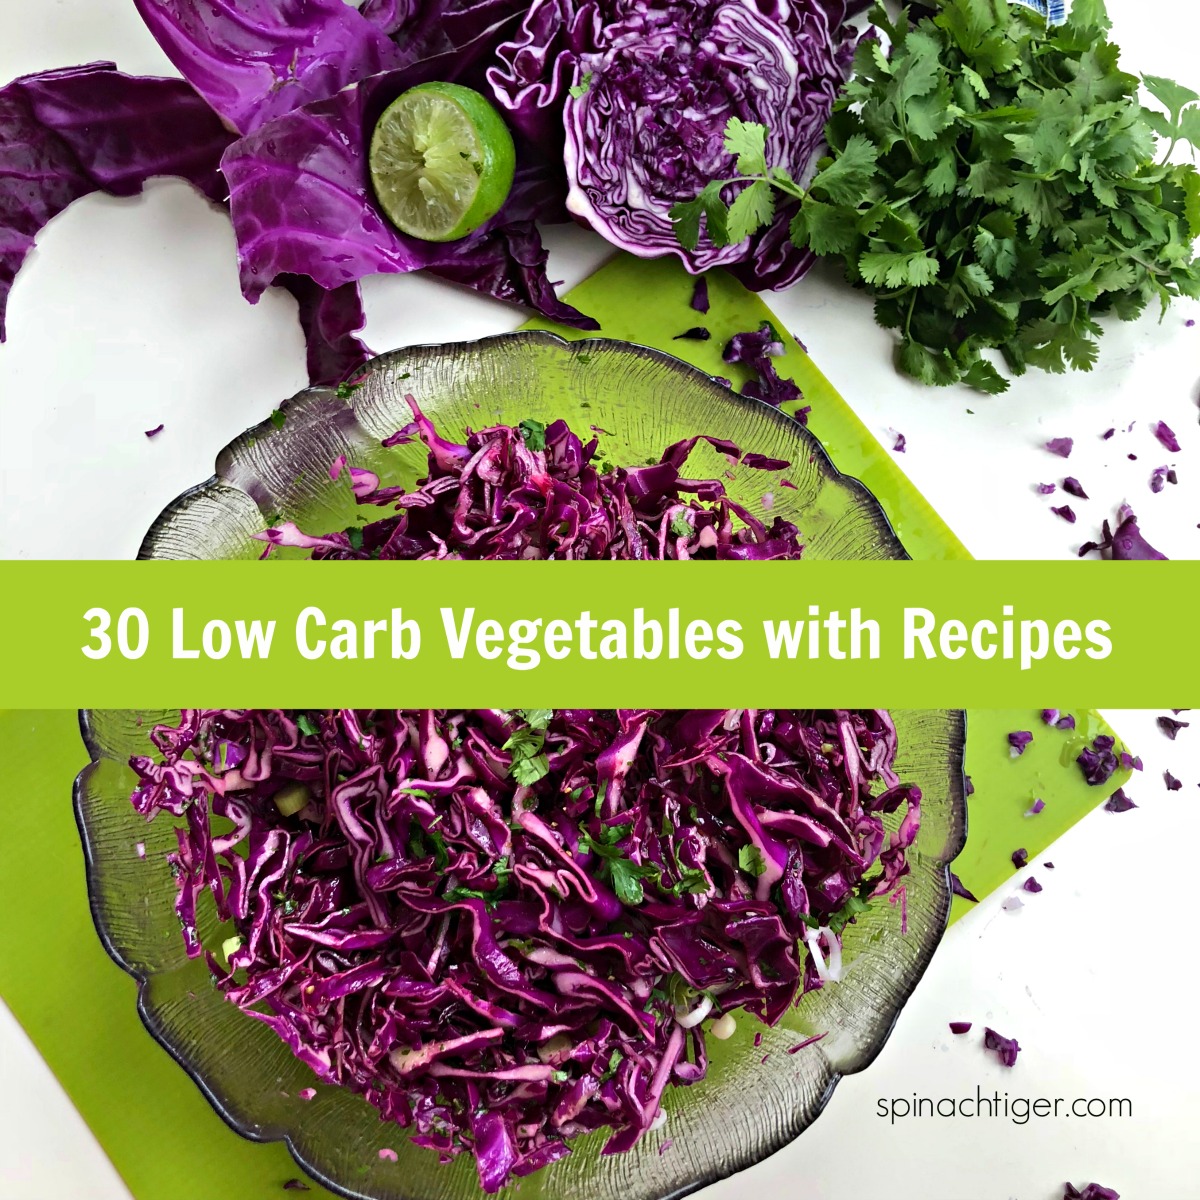 Low Carb Vegetables with Recipes